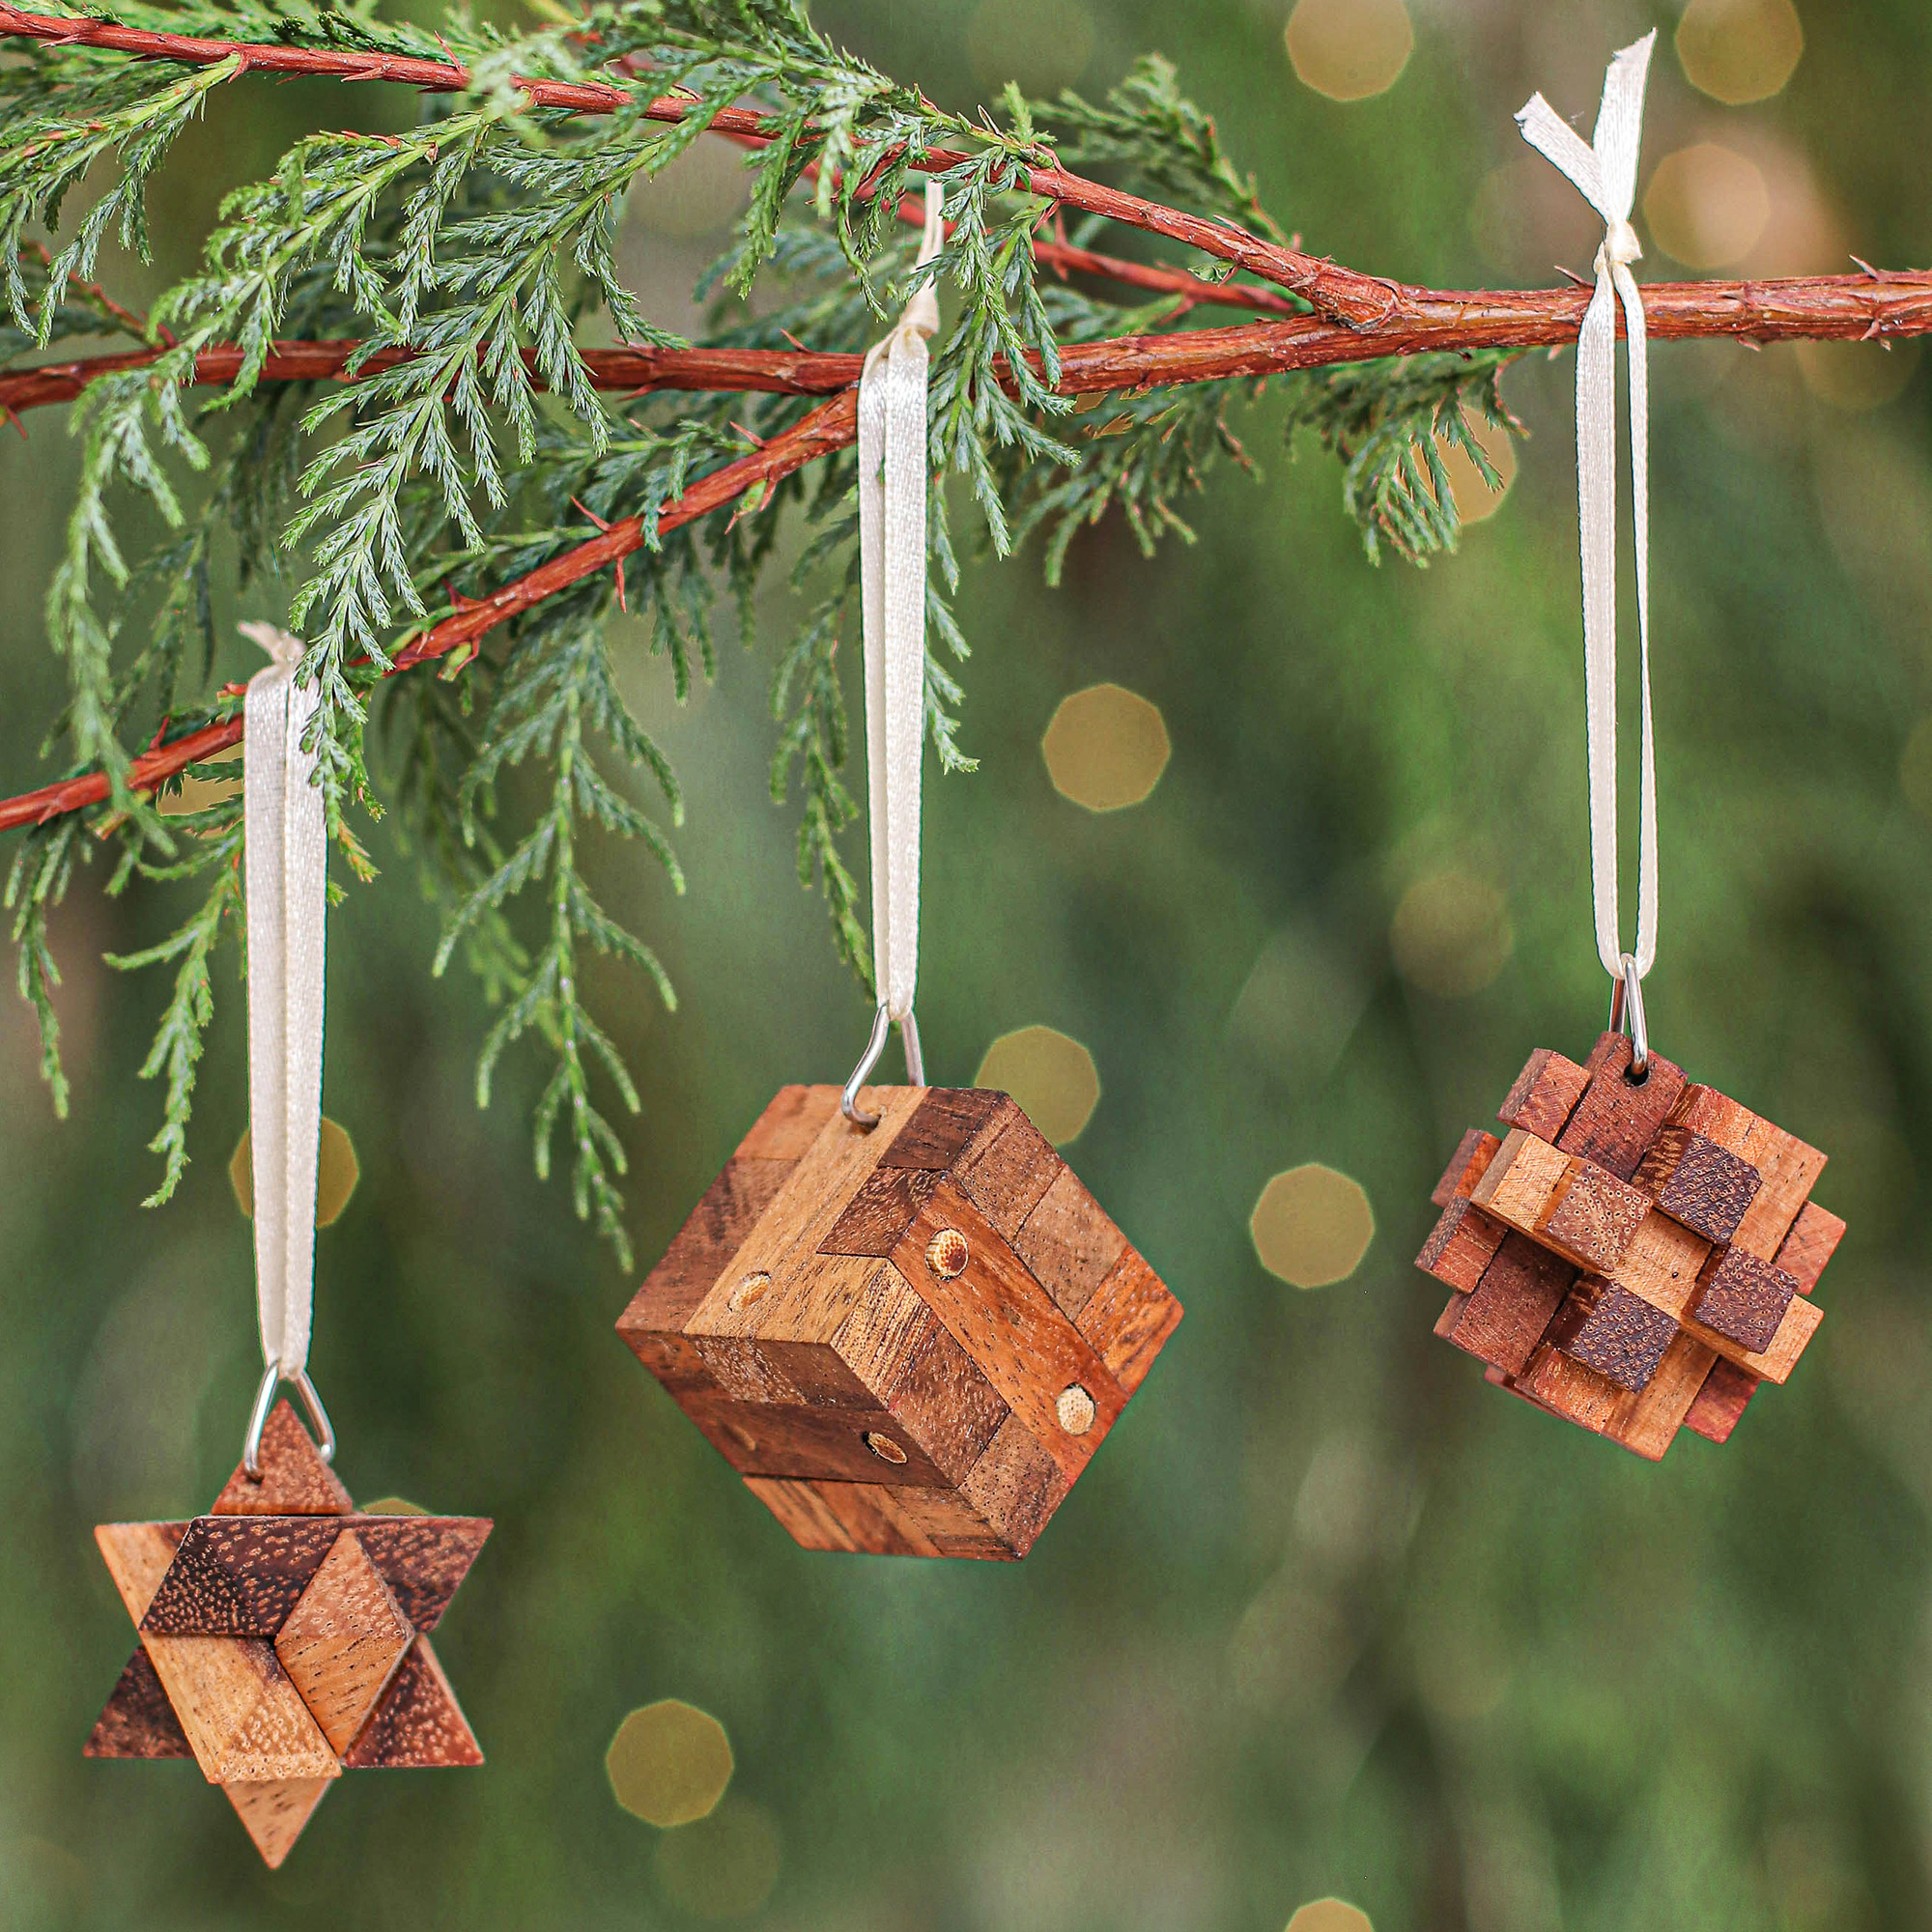 Wood Stick Christmas Tree Ornament - An Upcycled Project